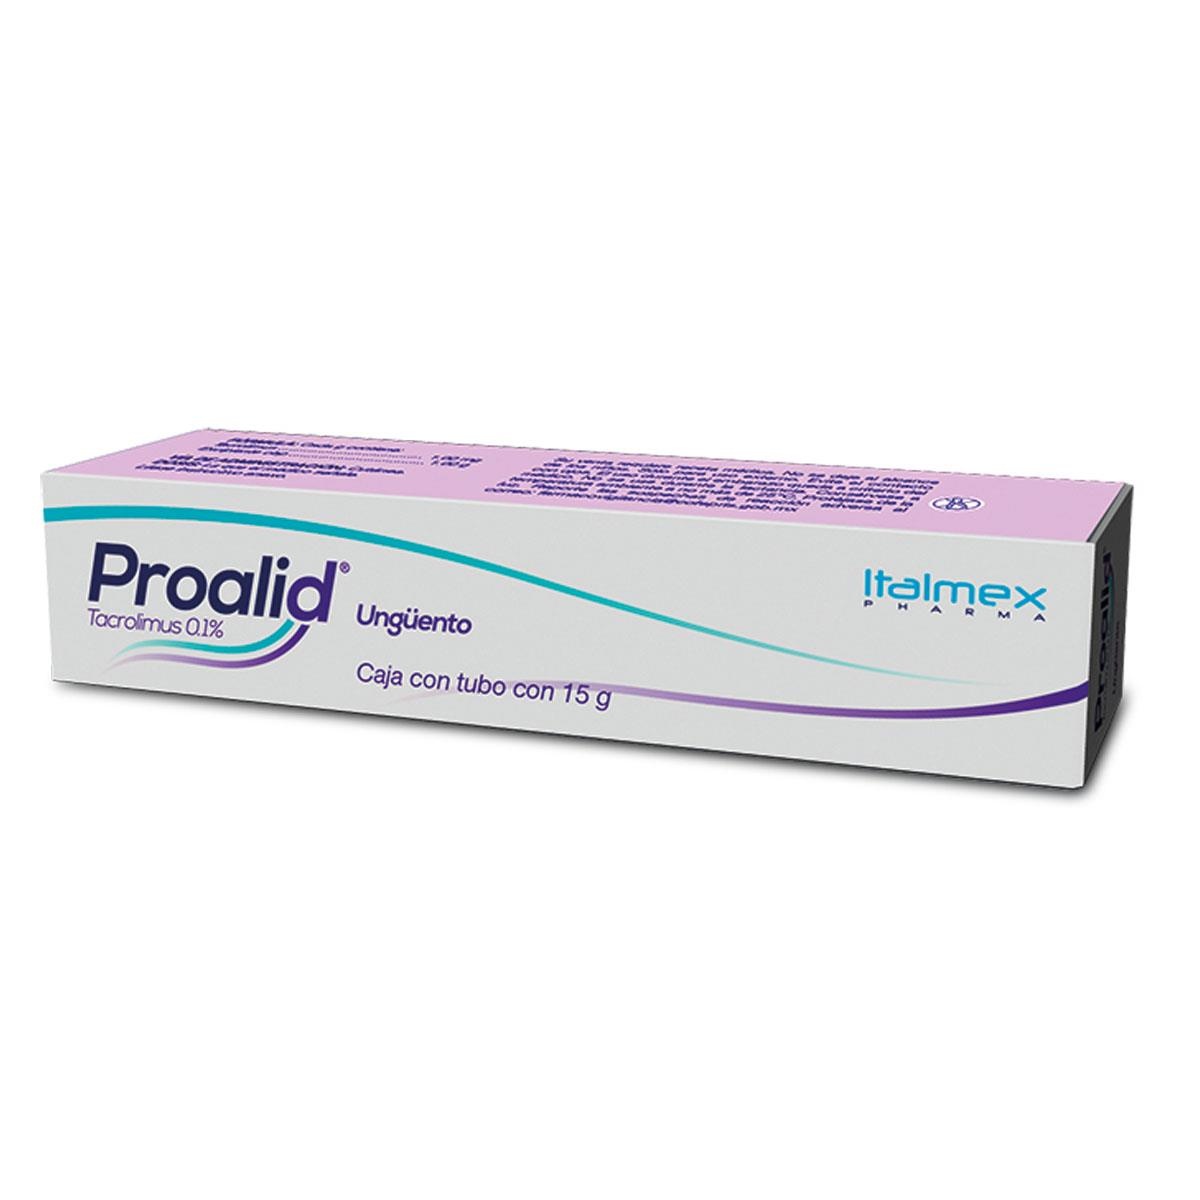 Proalid 1% Ung 15 g (MEGALABS)